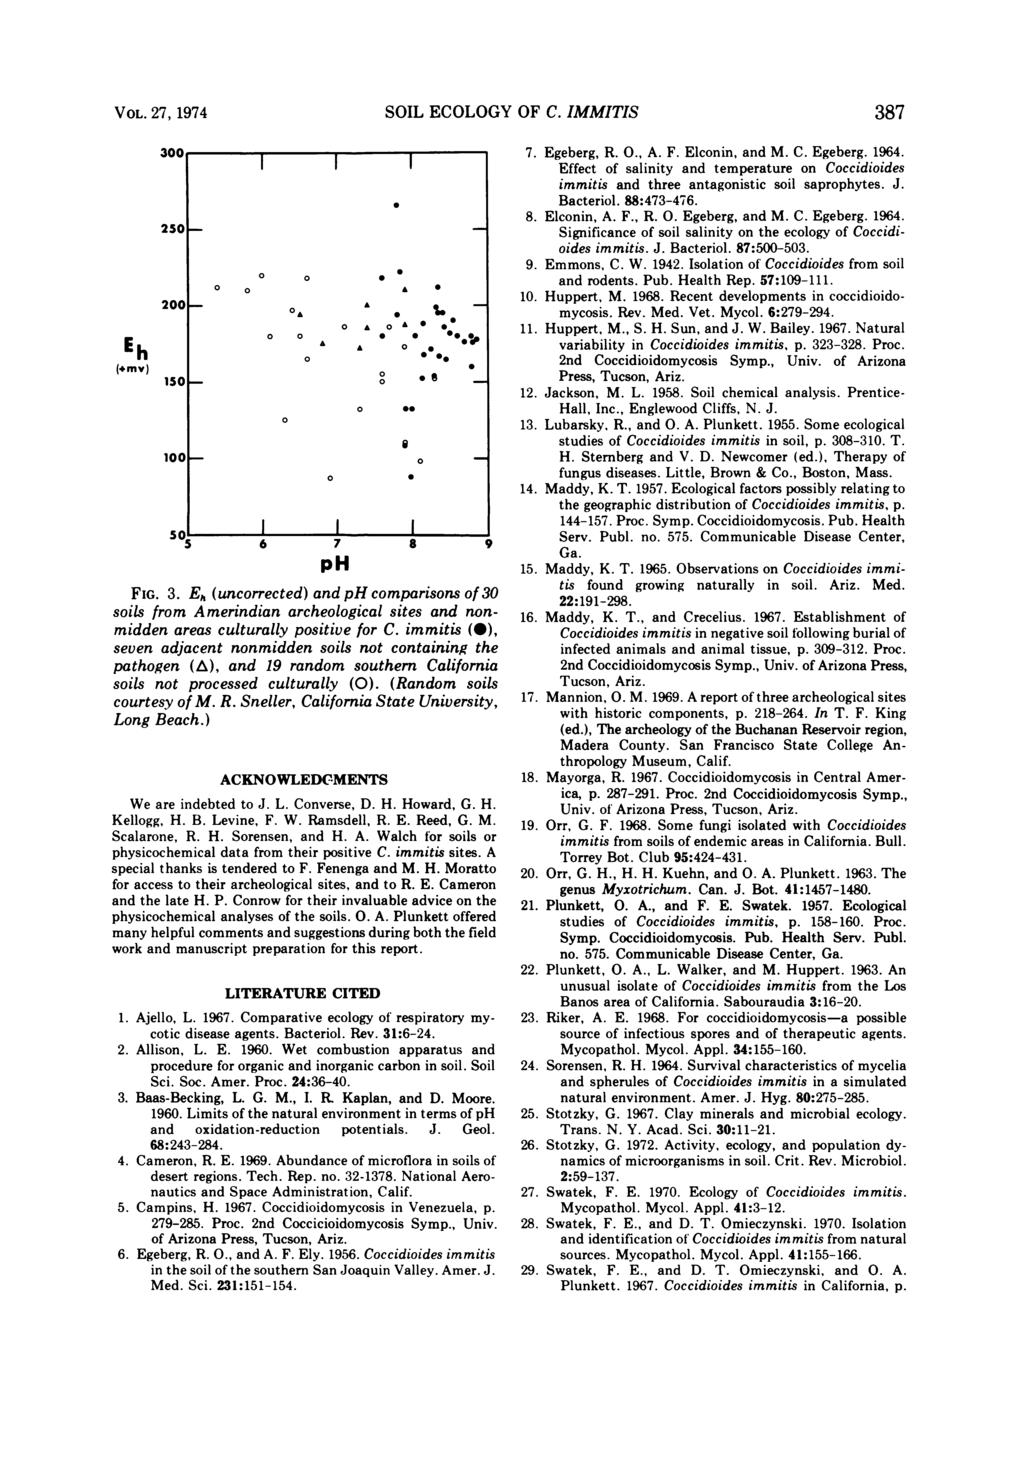 VOL. 27, 1974 SOIL ECOLOGY OF C. IMMITIS 387 Eh (*mv) 2501-2001- 1501-1001- II 0 A~~~~~~~~ o0 A 0. 0oA 0 00 o 0* 0 0A* * S0. -s 6 7 ph o @0 o~~~~~~ 8 I FIG. 3. E. (uncorrected) and ph comparisons of 30 soils from Amerindian archeological sites and nonmidden areas culturally positive for C.